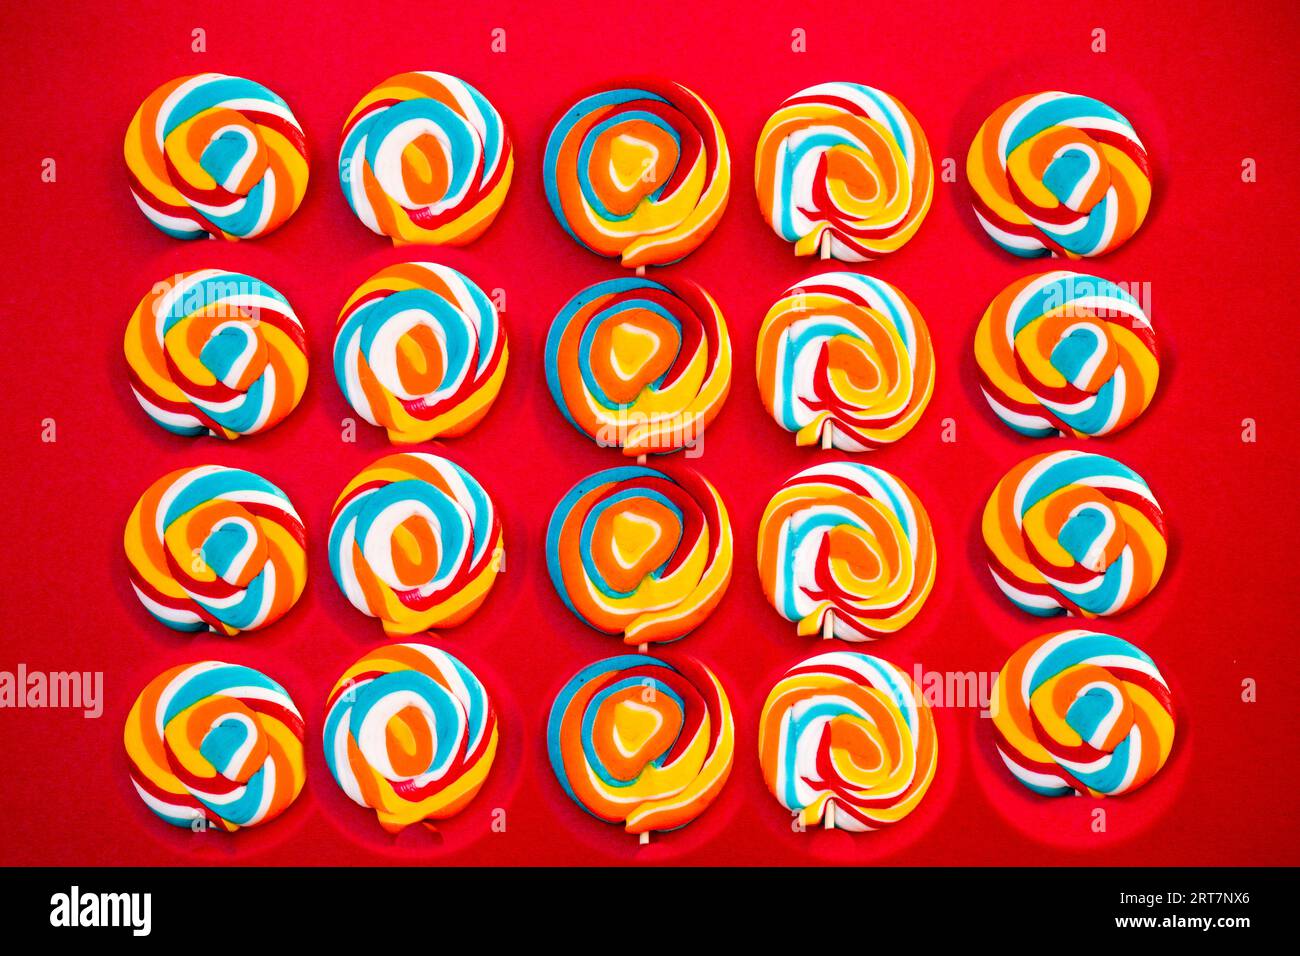 Colorful spiral lollipop candy . On a red background. Stock Photo